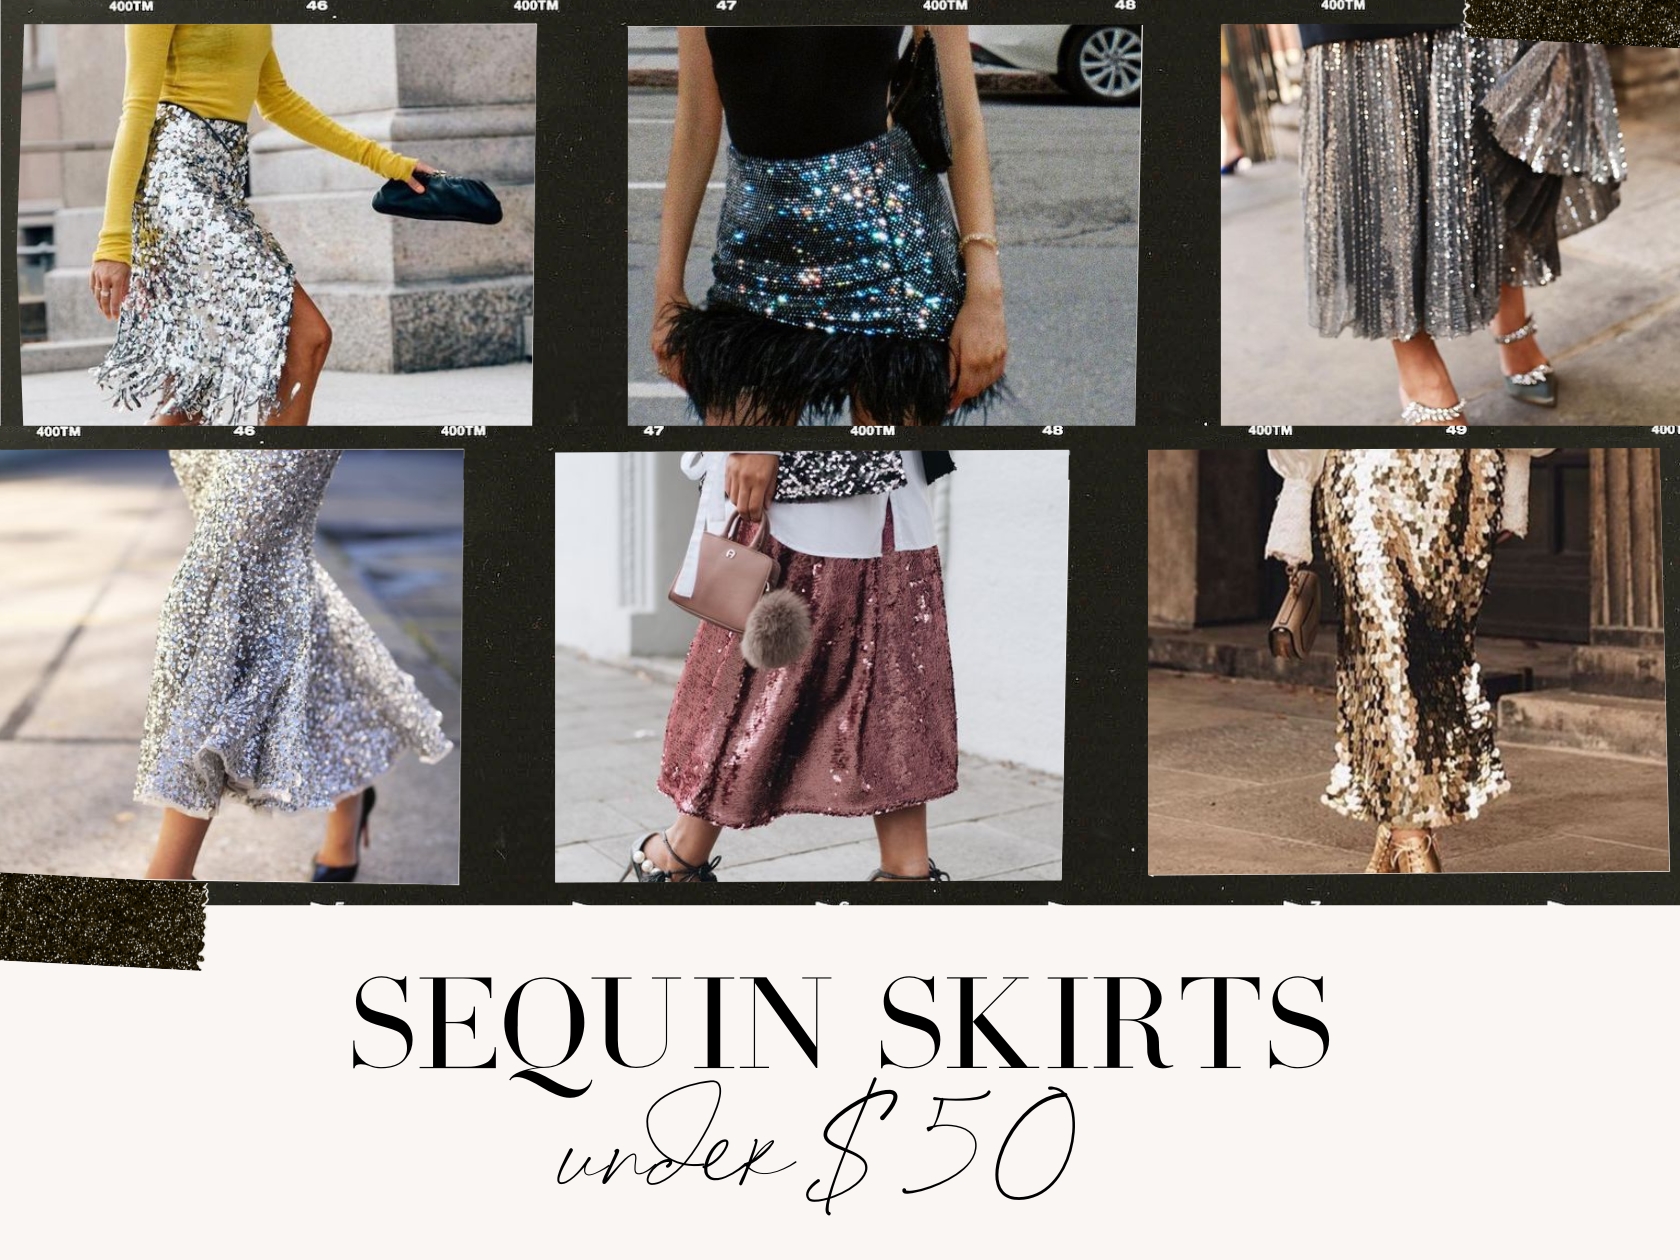 STYLE FILES: My Favorite Sequin Skirts Under $50